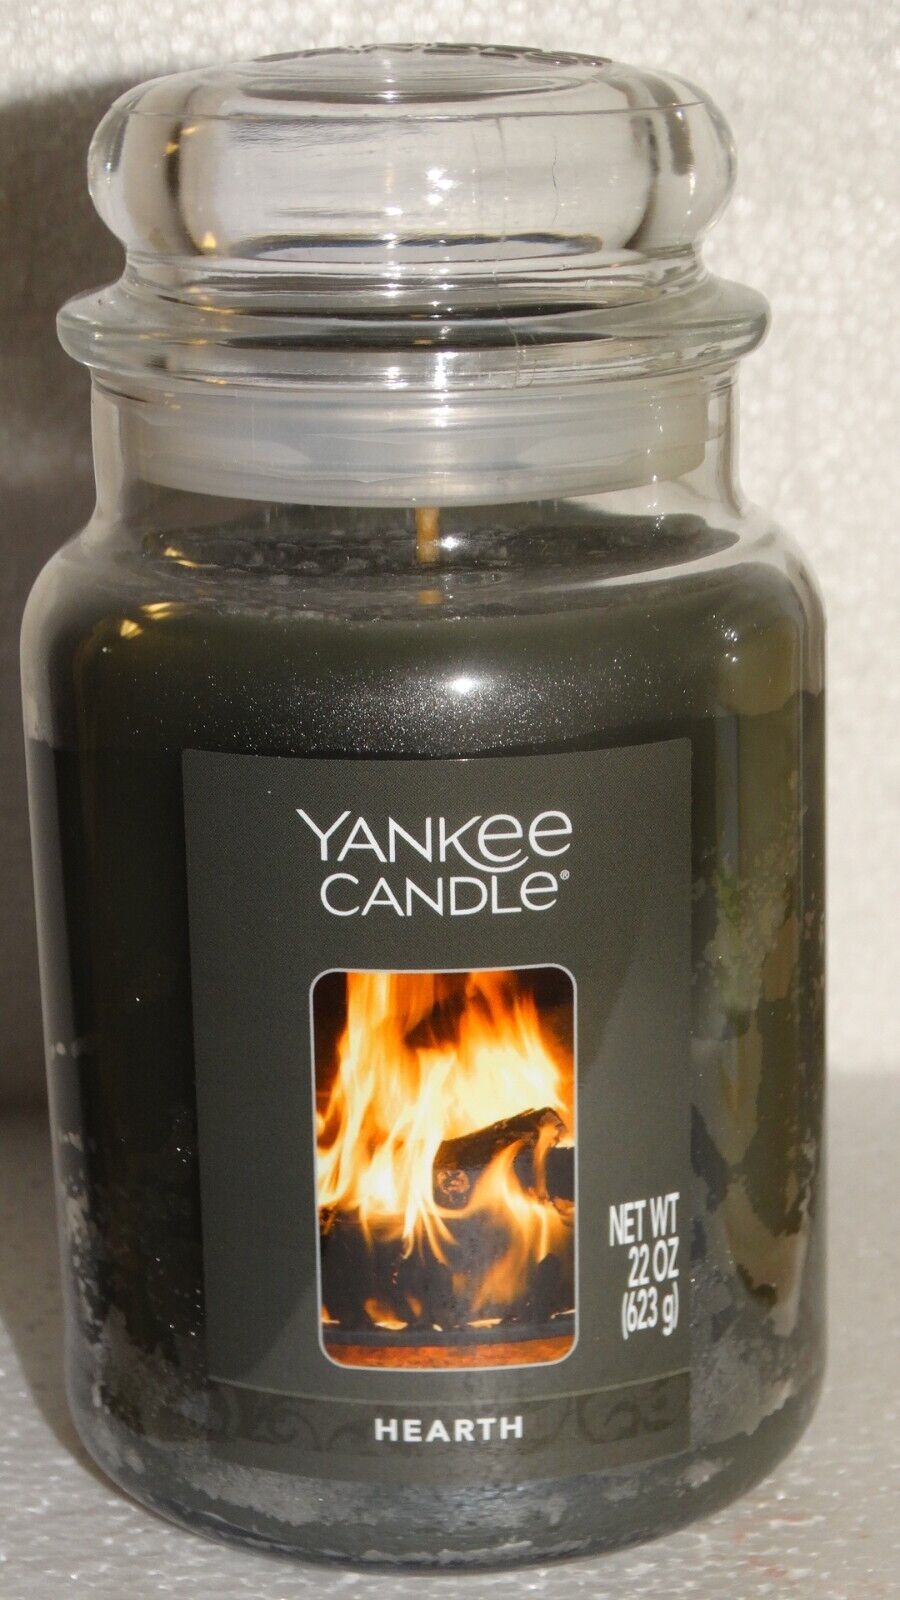 Yankee Candle Hearth Large Jar Candle 22 oz NEW 1609549 White Label